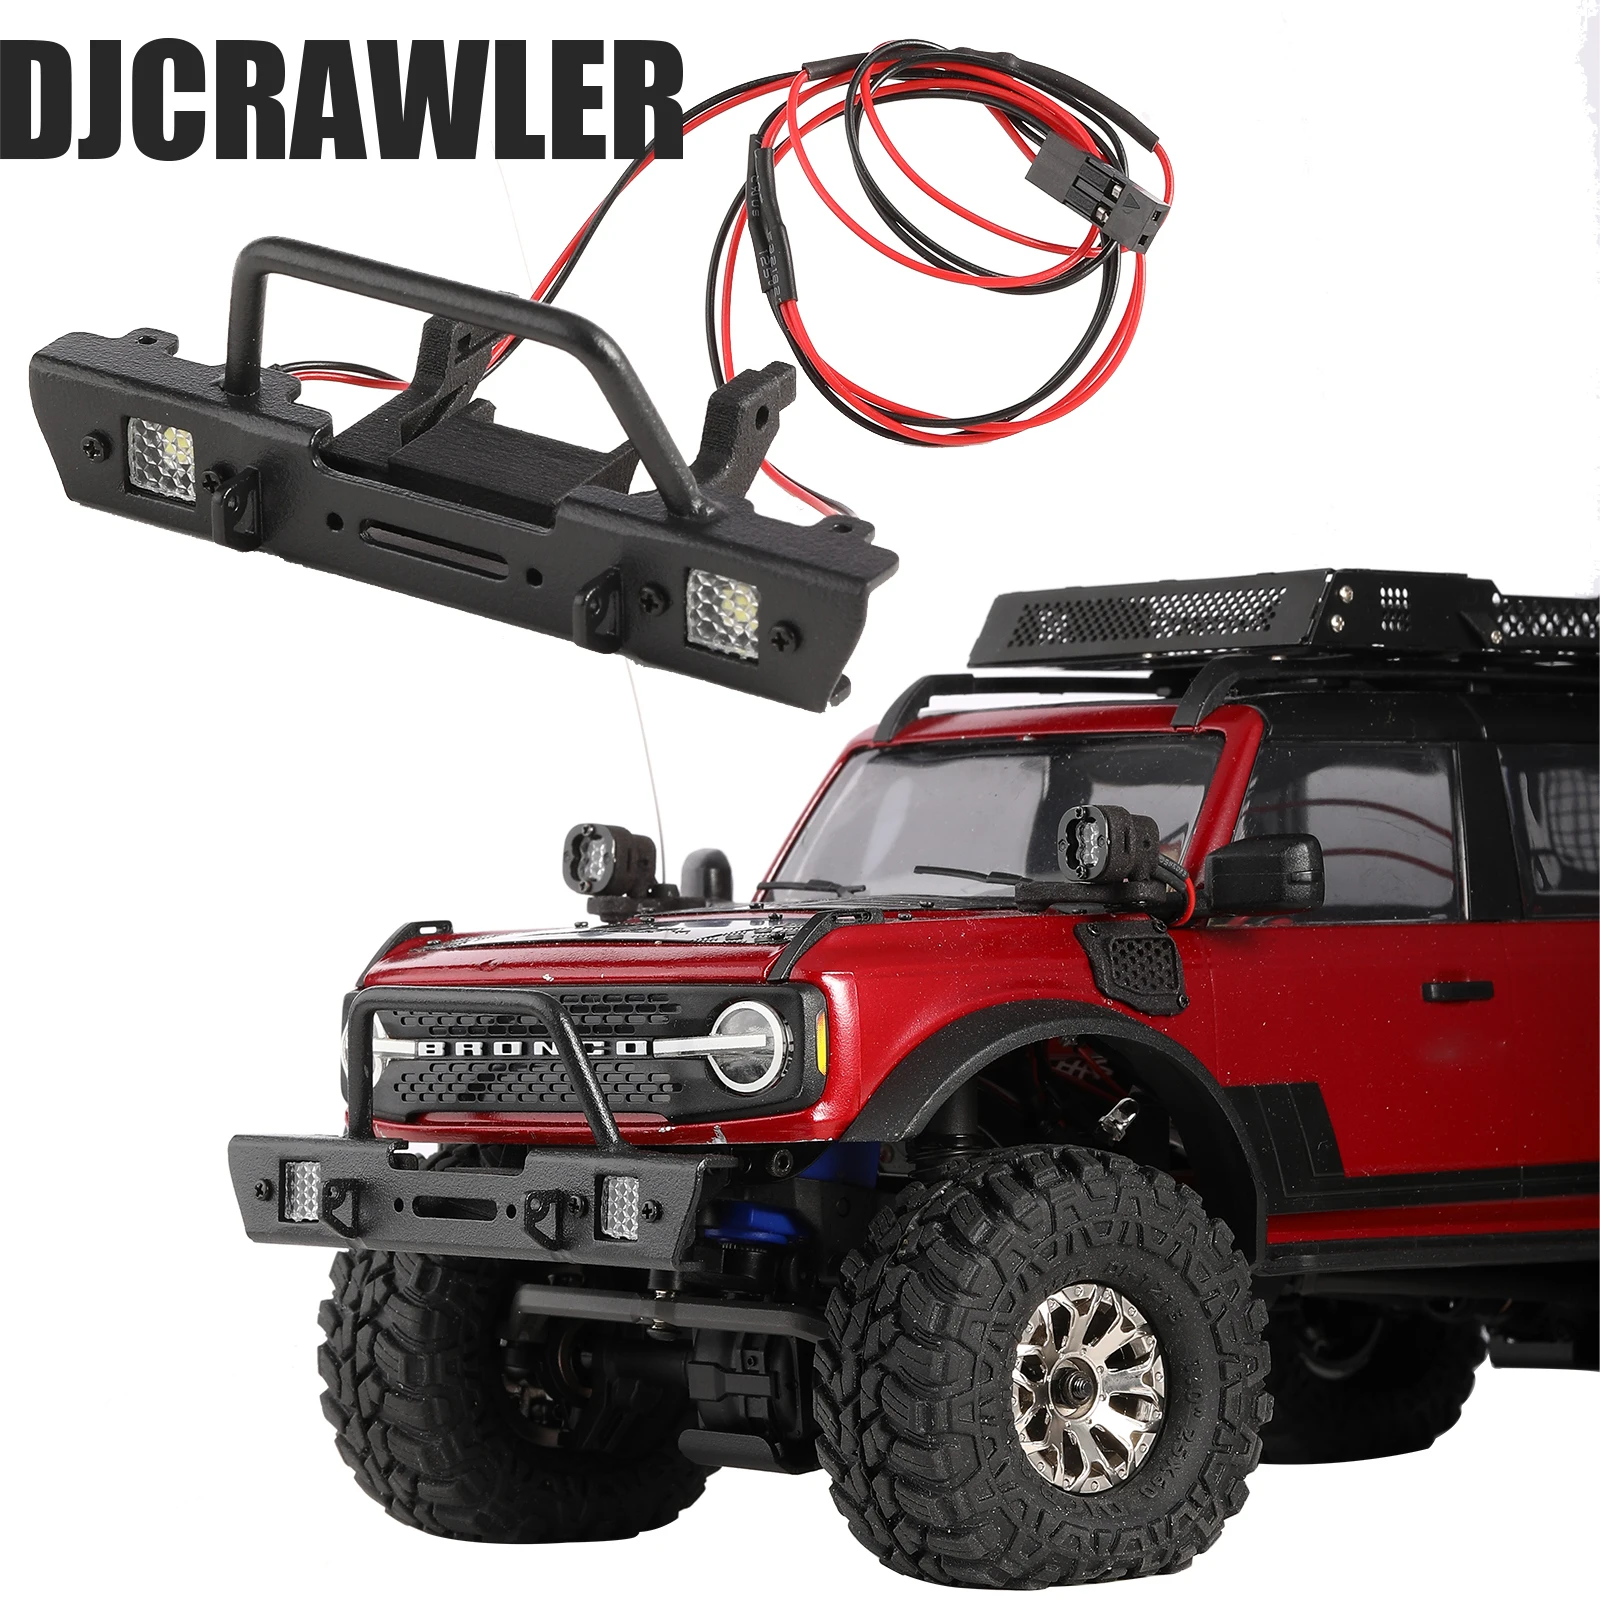 DJ 1/10 Chassis Armor Protection Scratch-resistant TRAXXAS TRX4